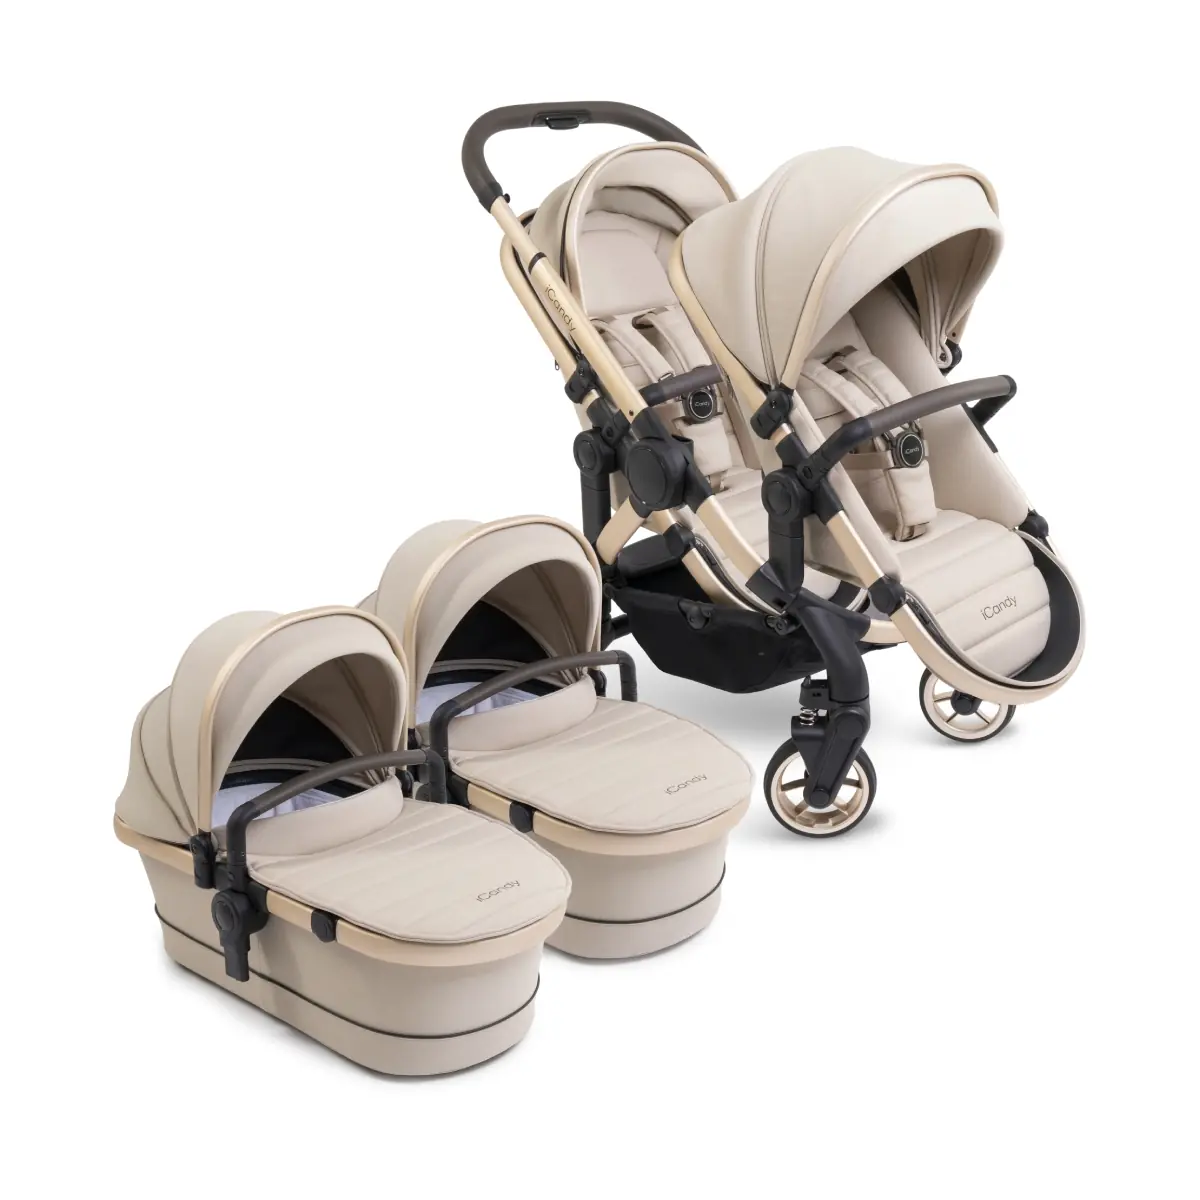 Image of iCandy Peach 7 Twin Pushchair Bundle - Biscotti